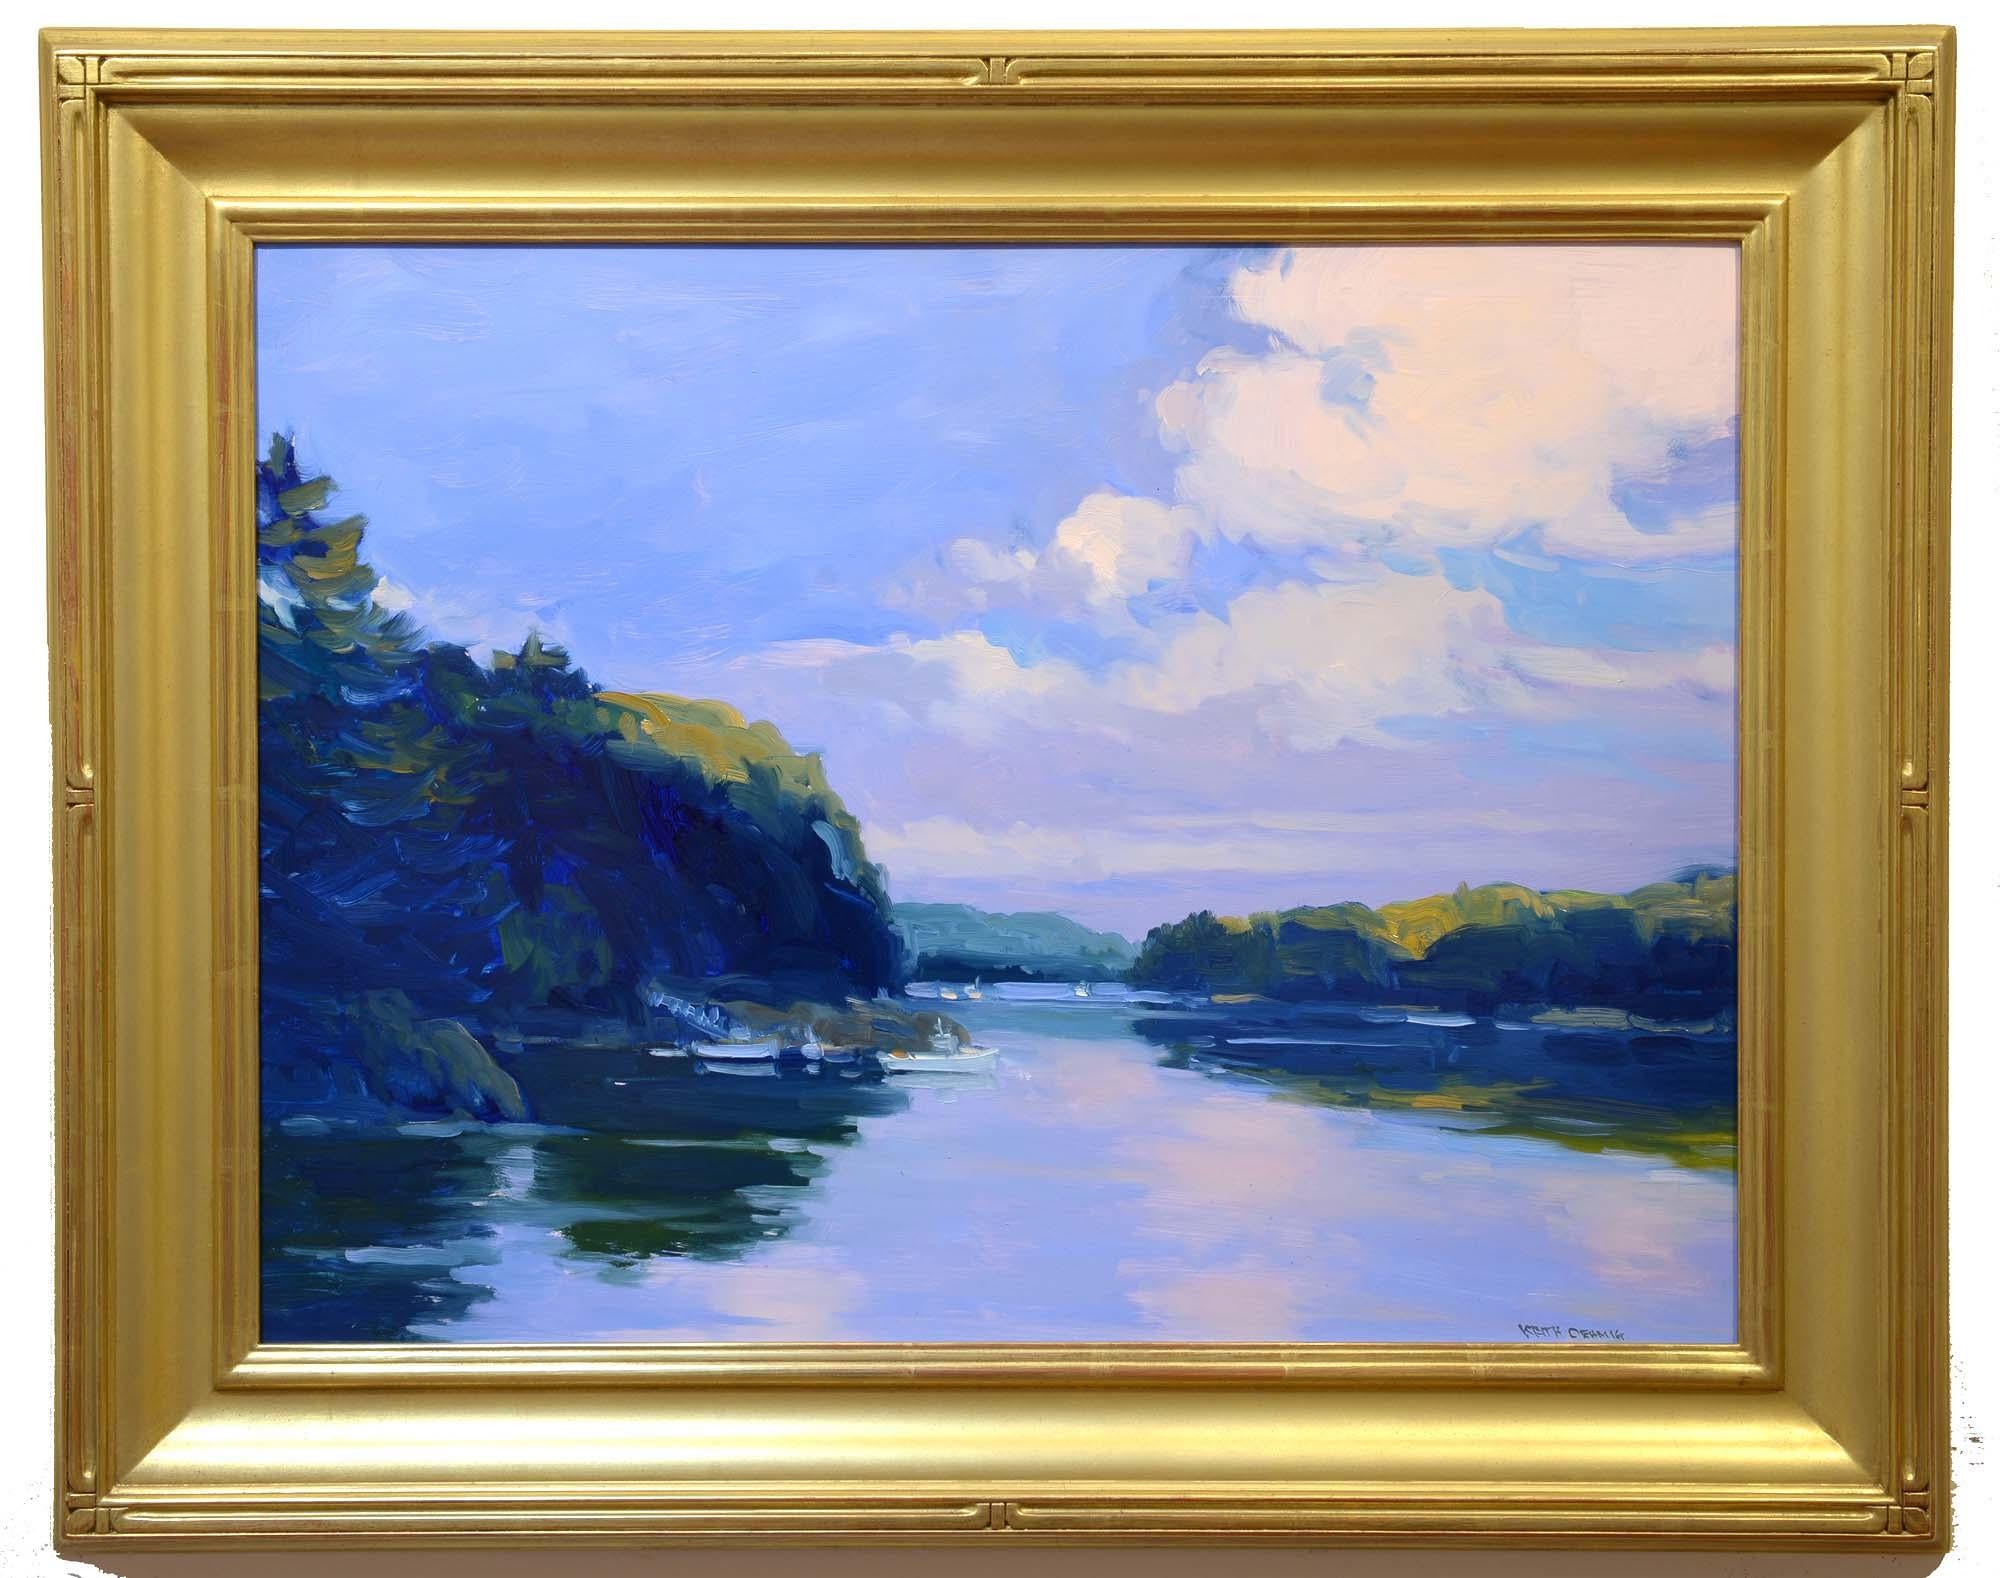 Long Cove, Harpswell, Maine, paysage, côtier, bateaux, impressionniste, huile - Painting de Keith Oehmig